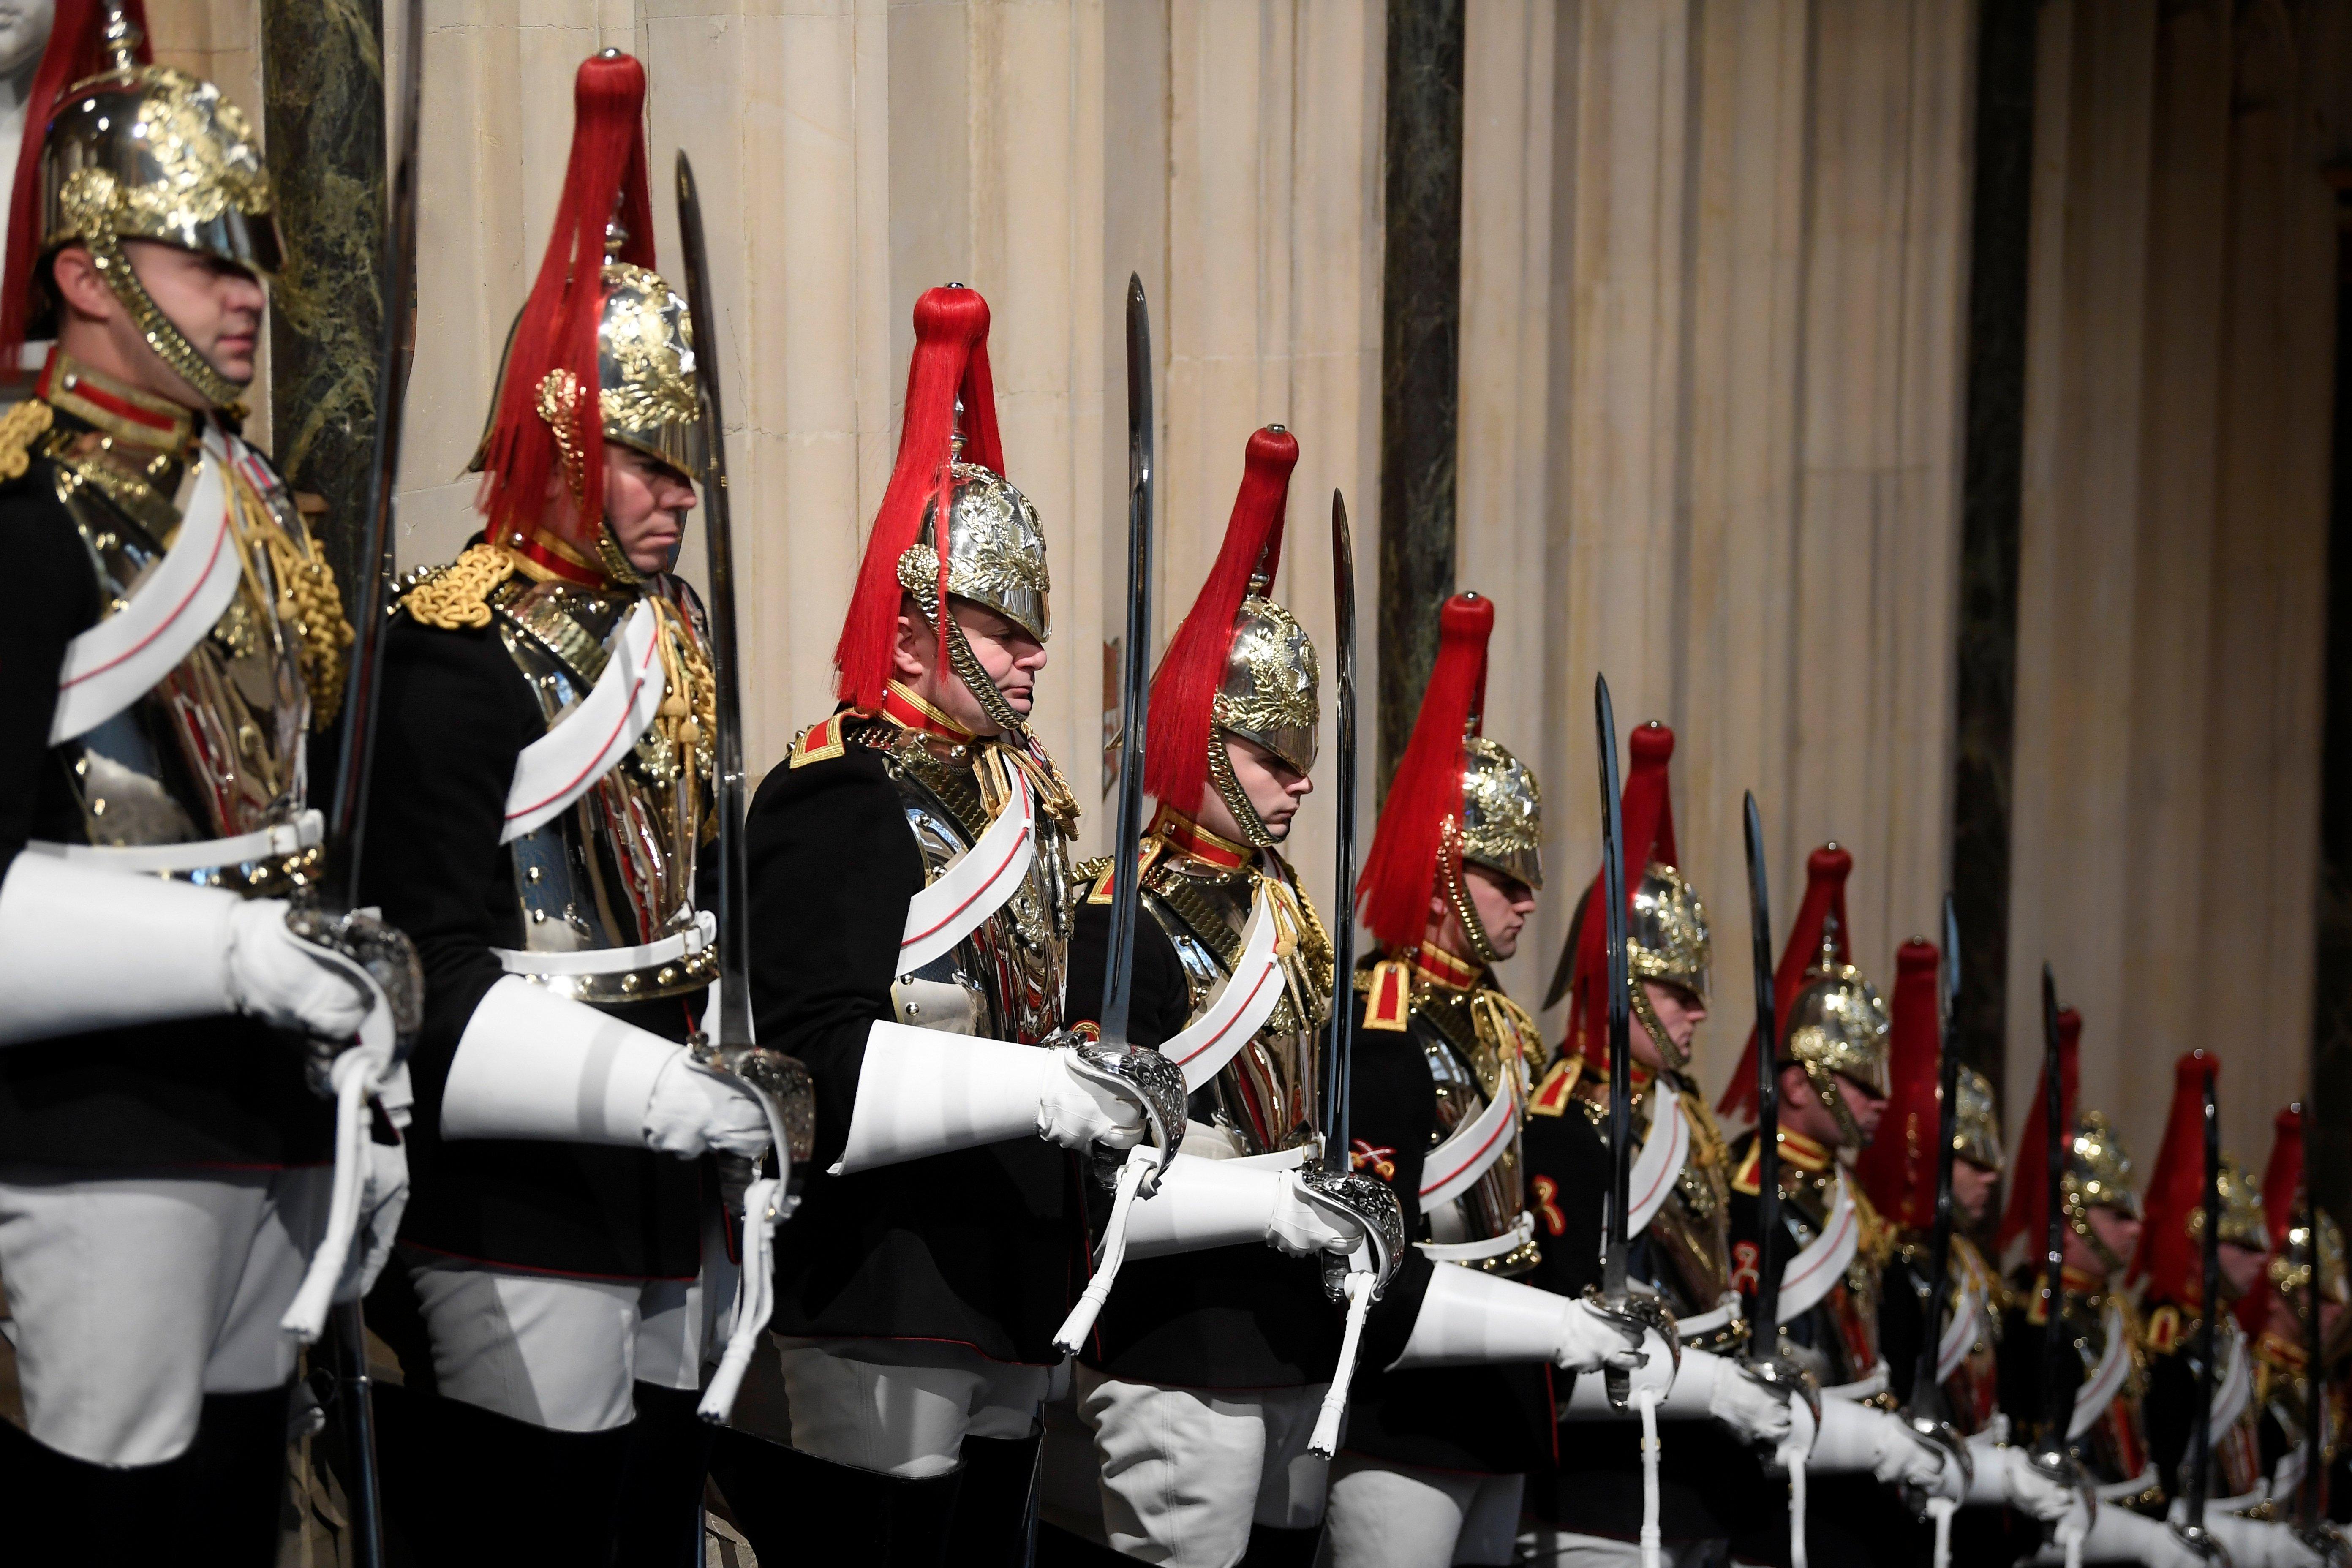 Members of the Blues and Royals stand in the Norman Porch ahead of the State Opening of Parliament by Queen Elizabeth II, in the House of Lords at the Palace of Westminster in London.